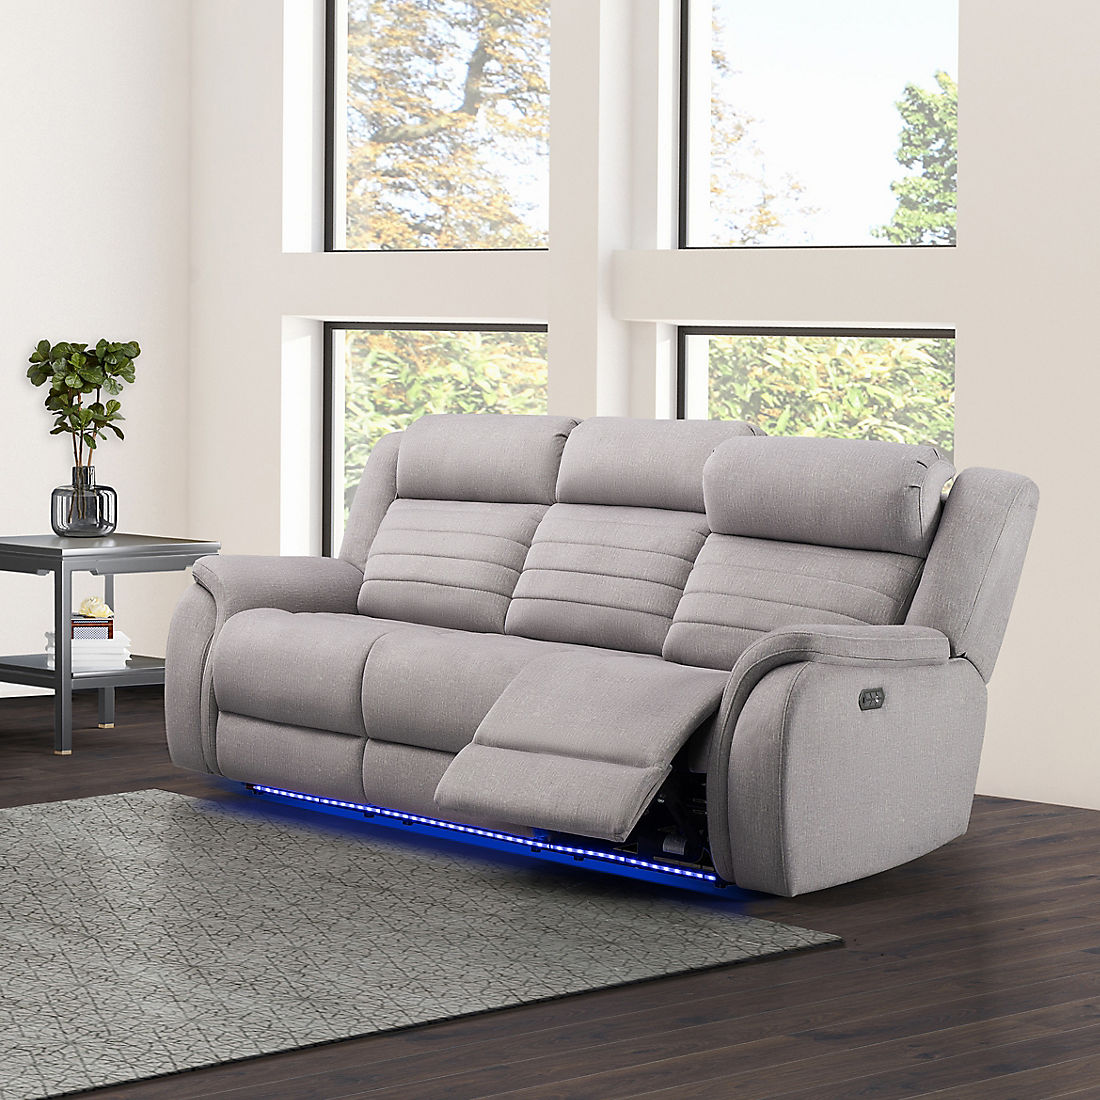 Abbyson George Power Reclining Sofa With Heat And Massage Gray Bj S Whole Club